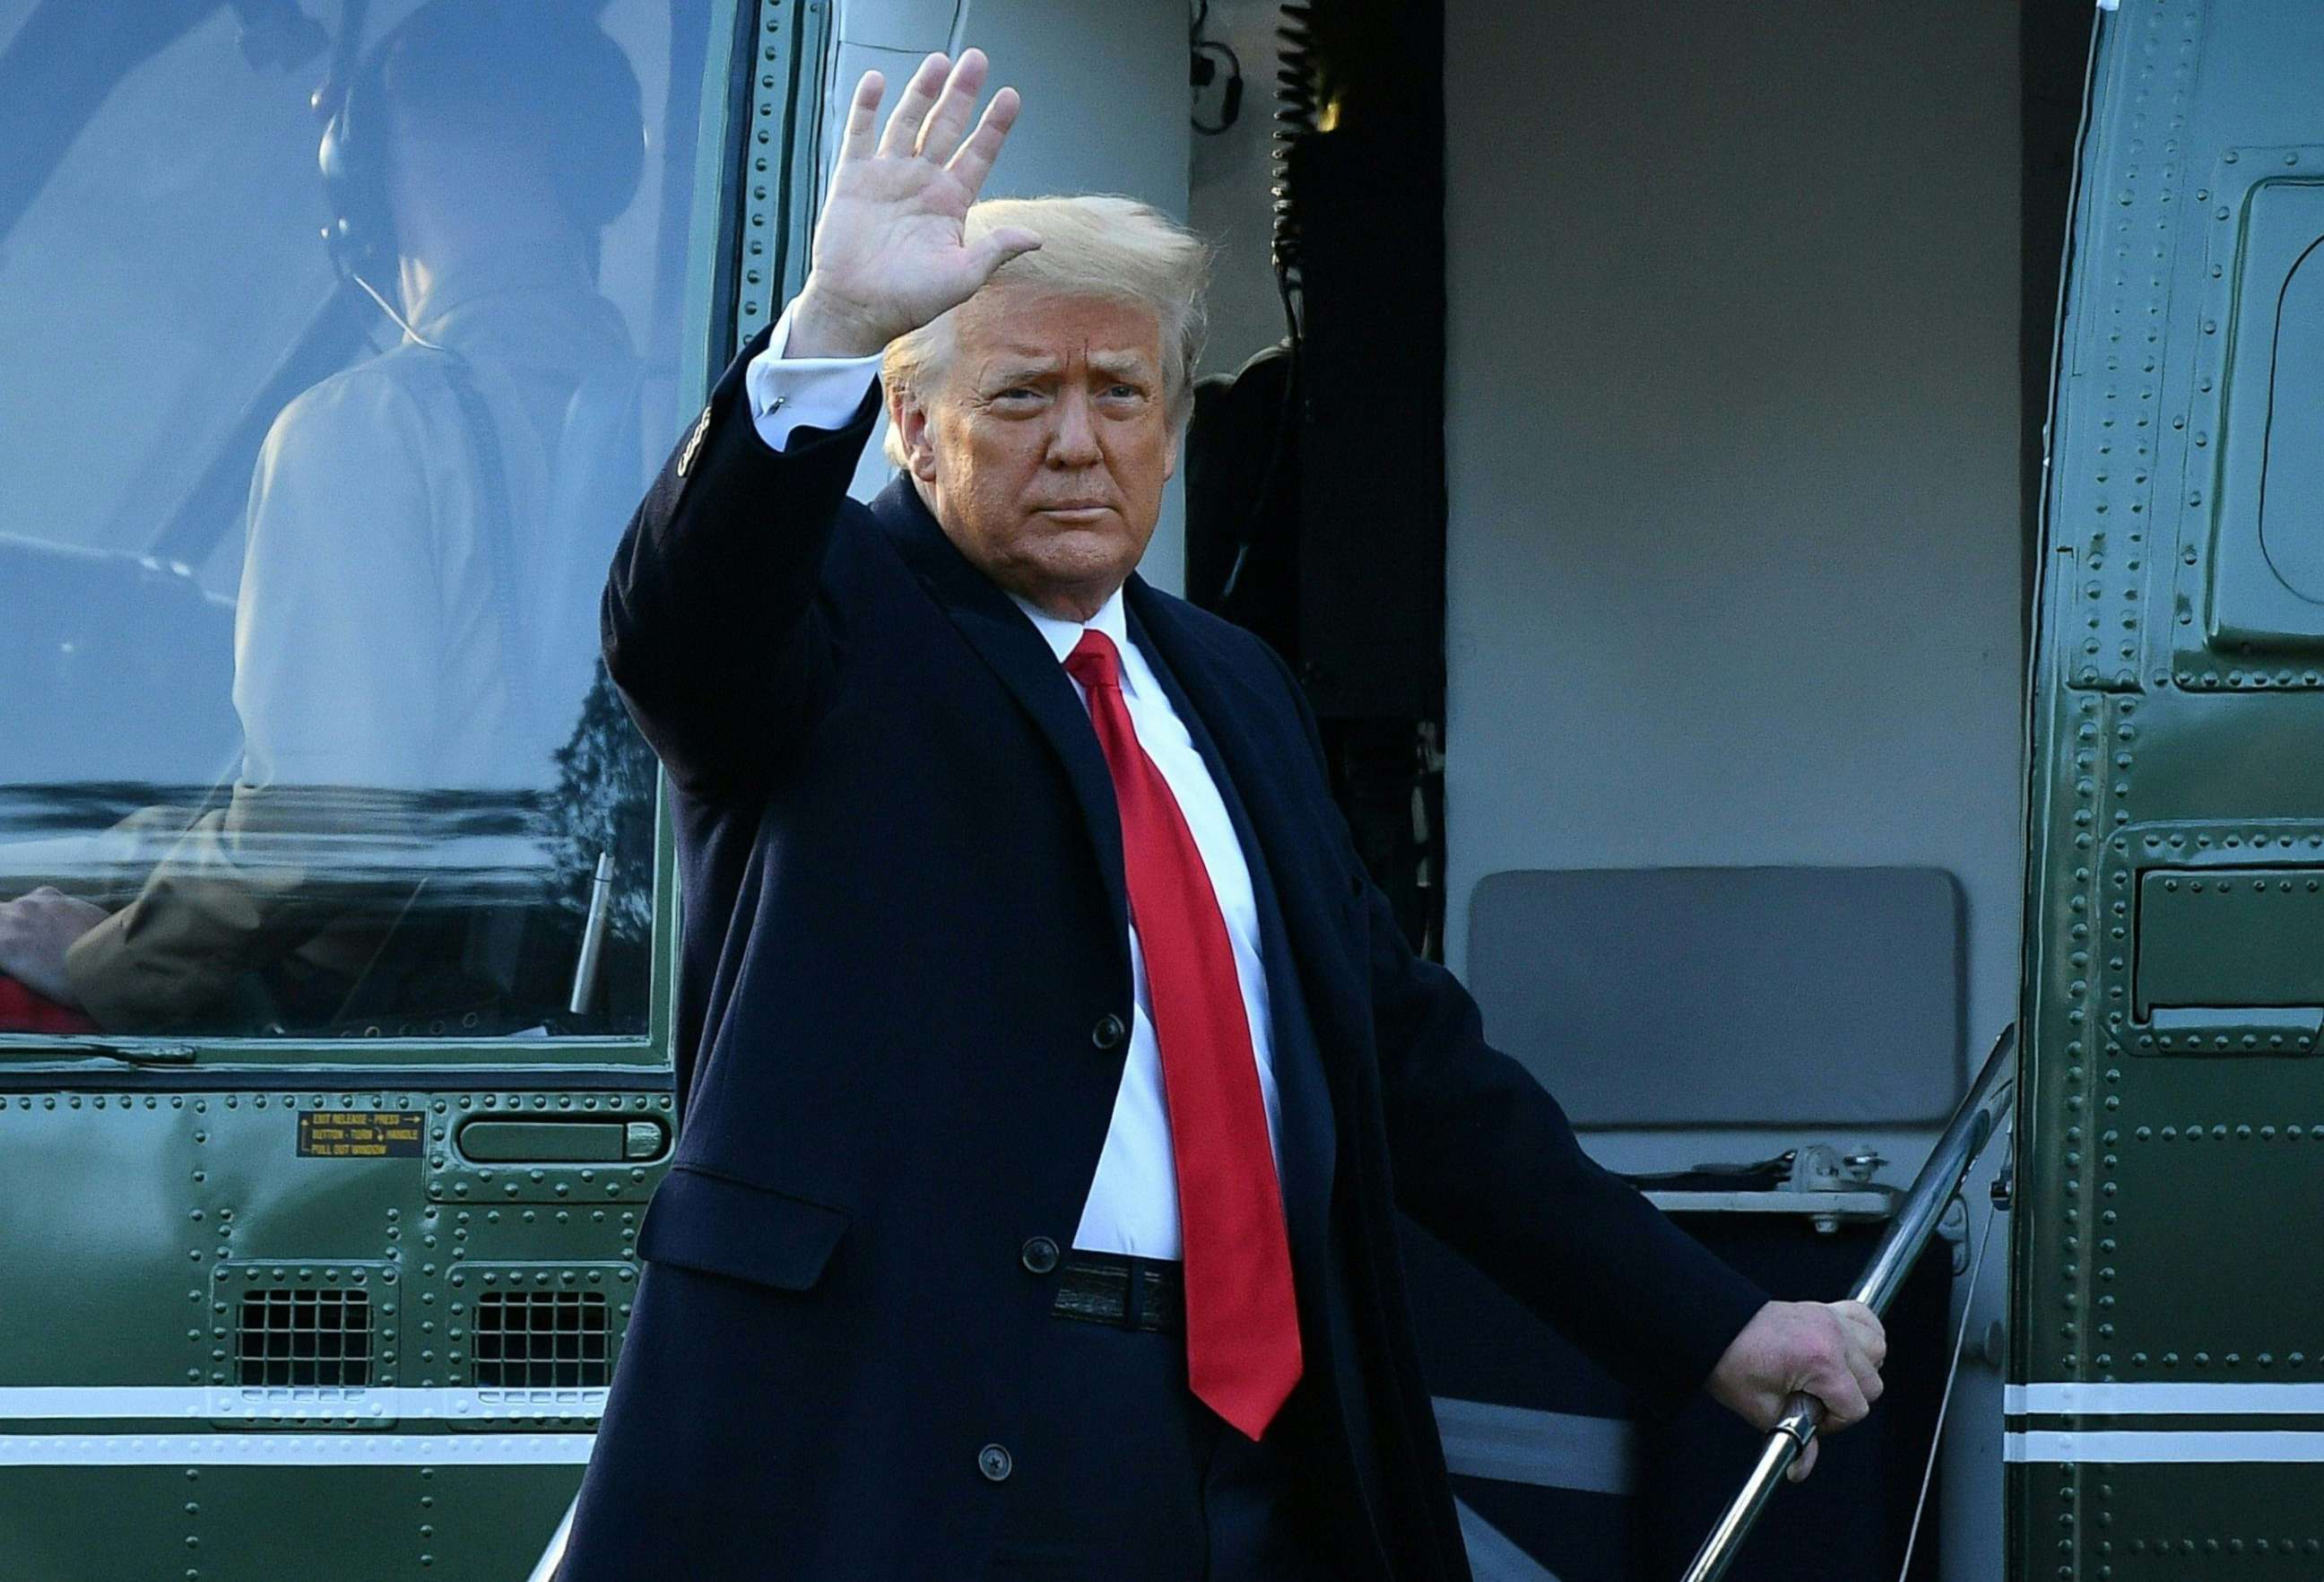 PHOTO: Outgoing President Donald Trump waves as he boards Marine One at the White House in Washington, D.C, Jan. 20, 2021.